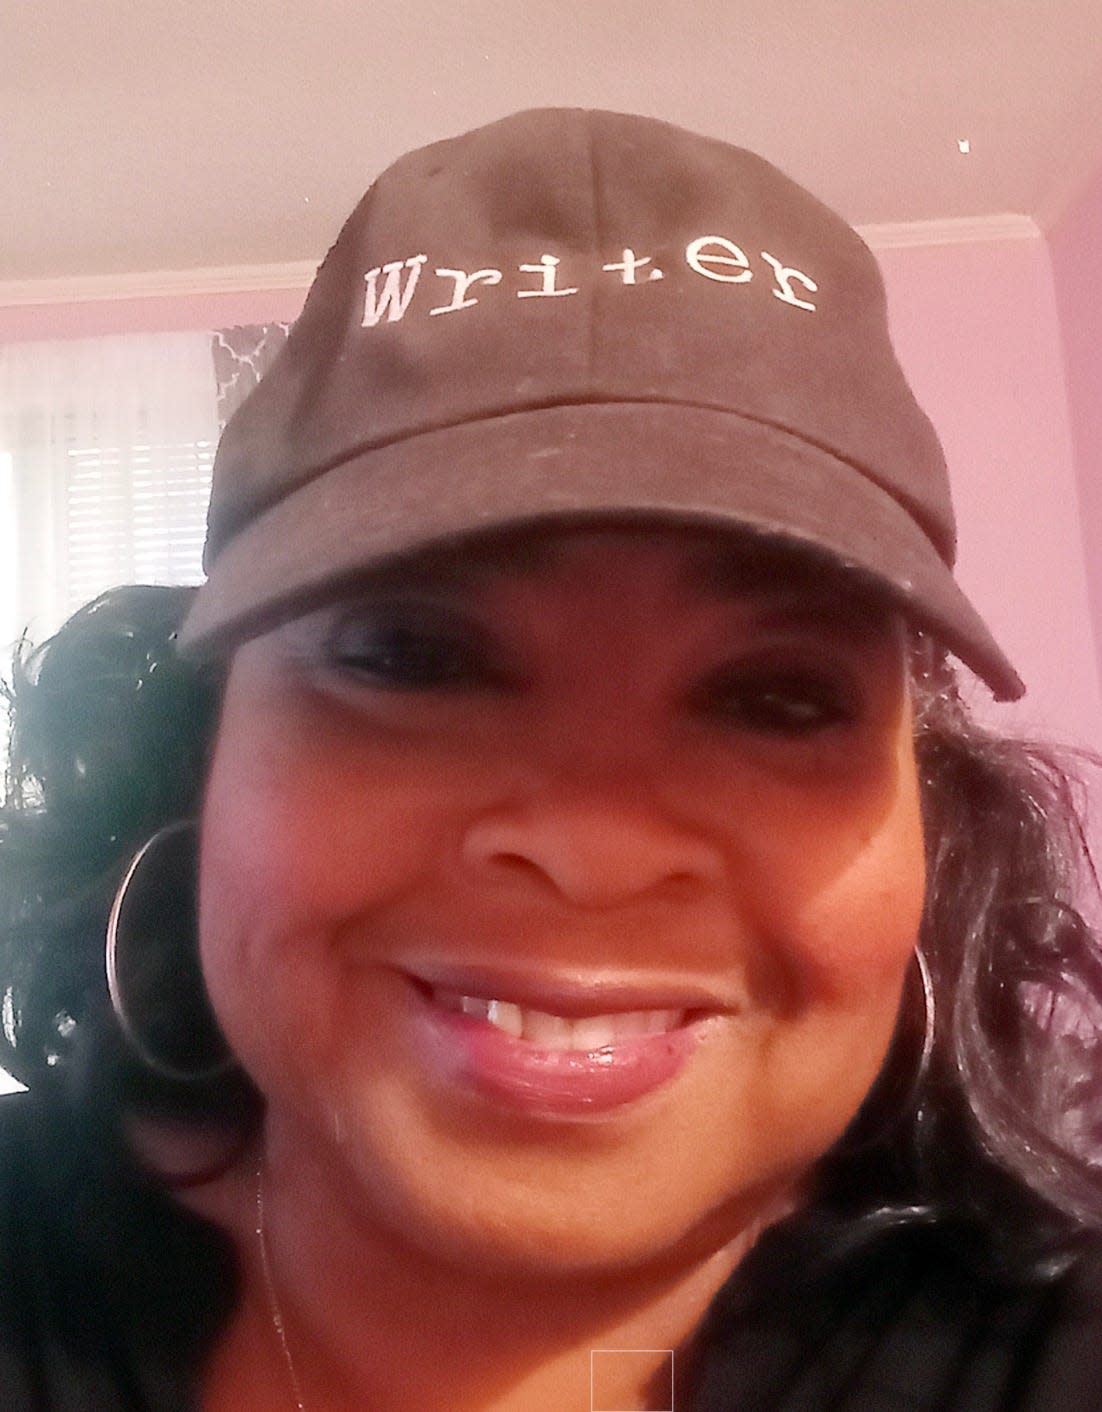 “Wicked Weave” is a project that has been 20 years in the making for filmmaker, director and writer Lena Claybon. She is seeking funding for the film project set to be filmed in Louisiana.